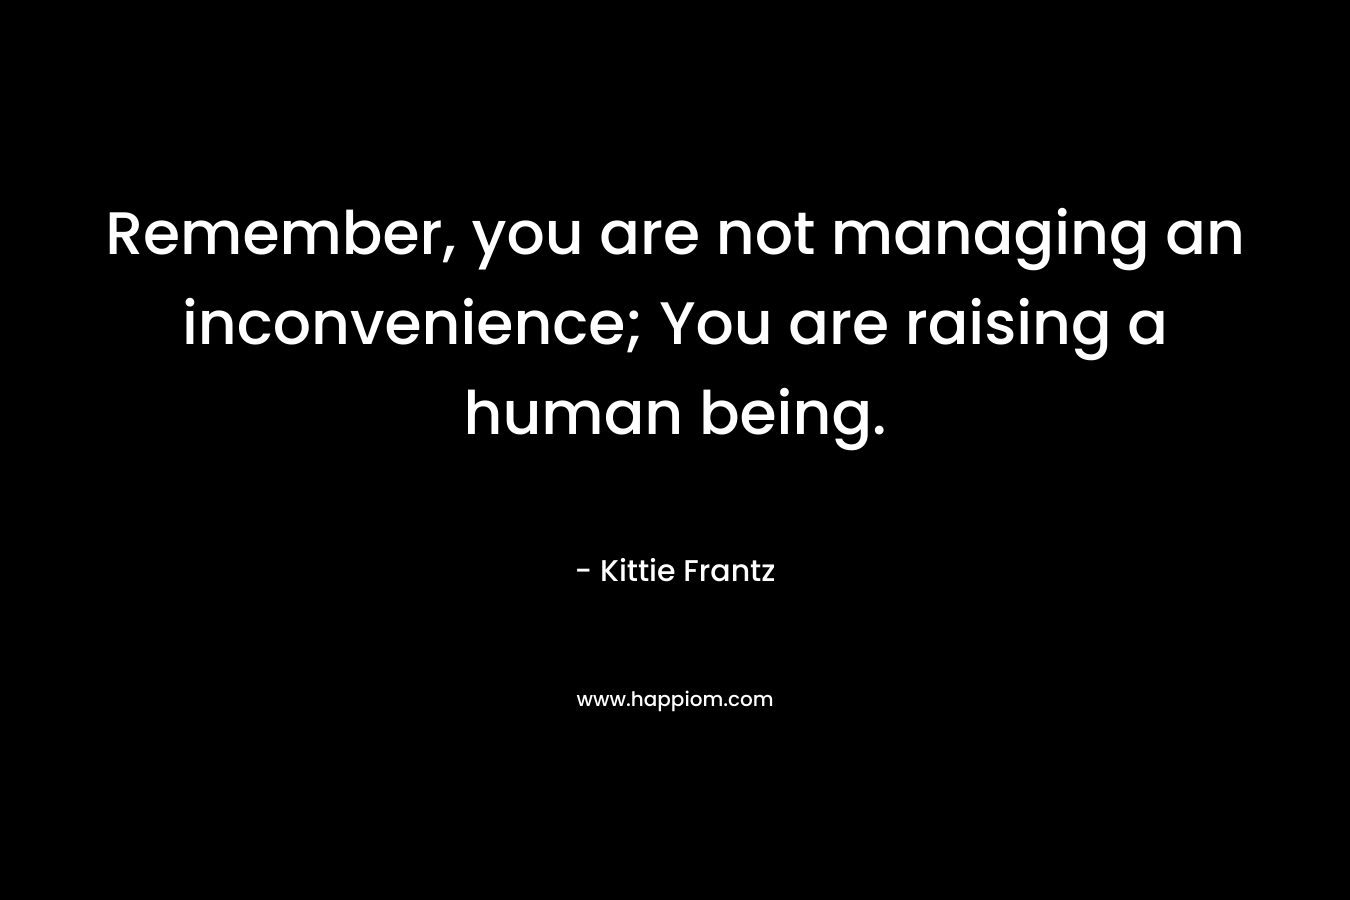 Remember, you are not managing an inconvenience; You are raising a human being.